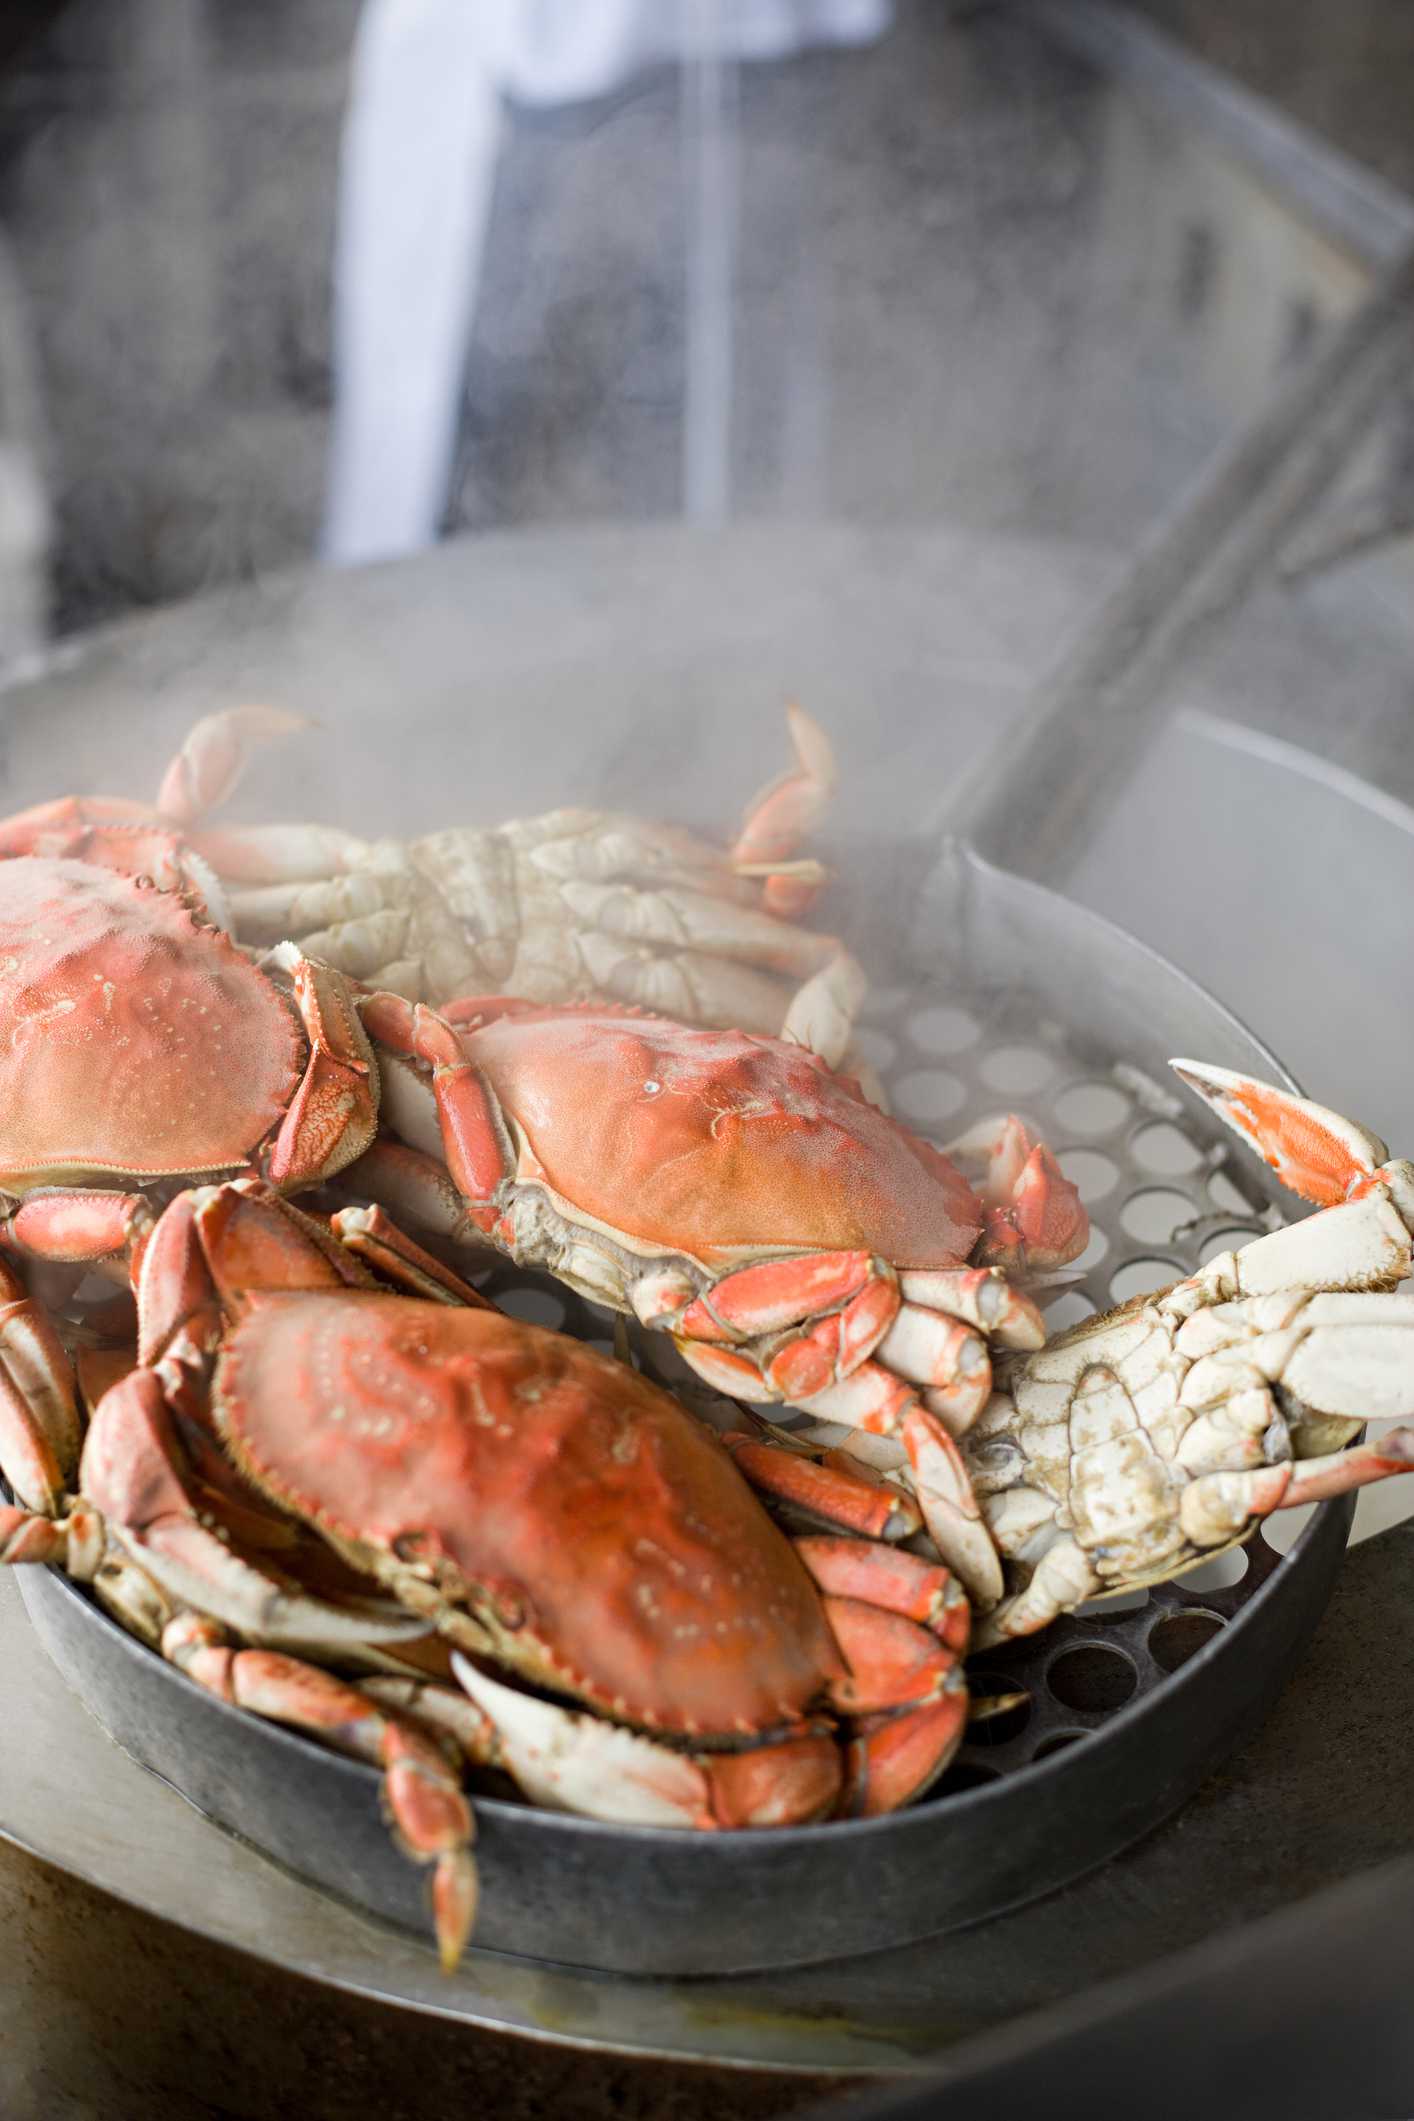 Boiling Crab Logo - Boil a Bushel of Crabs With This Step-By-Step Recipe